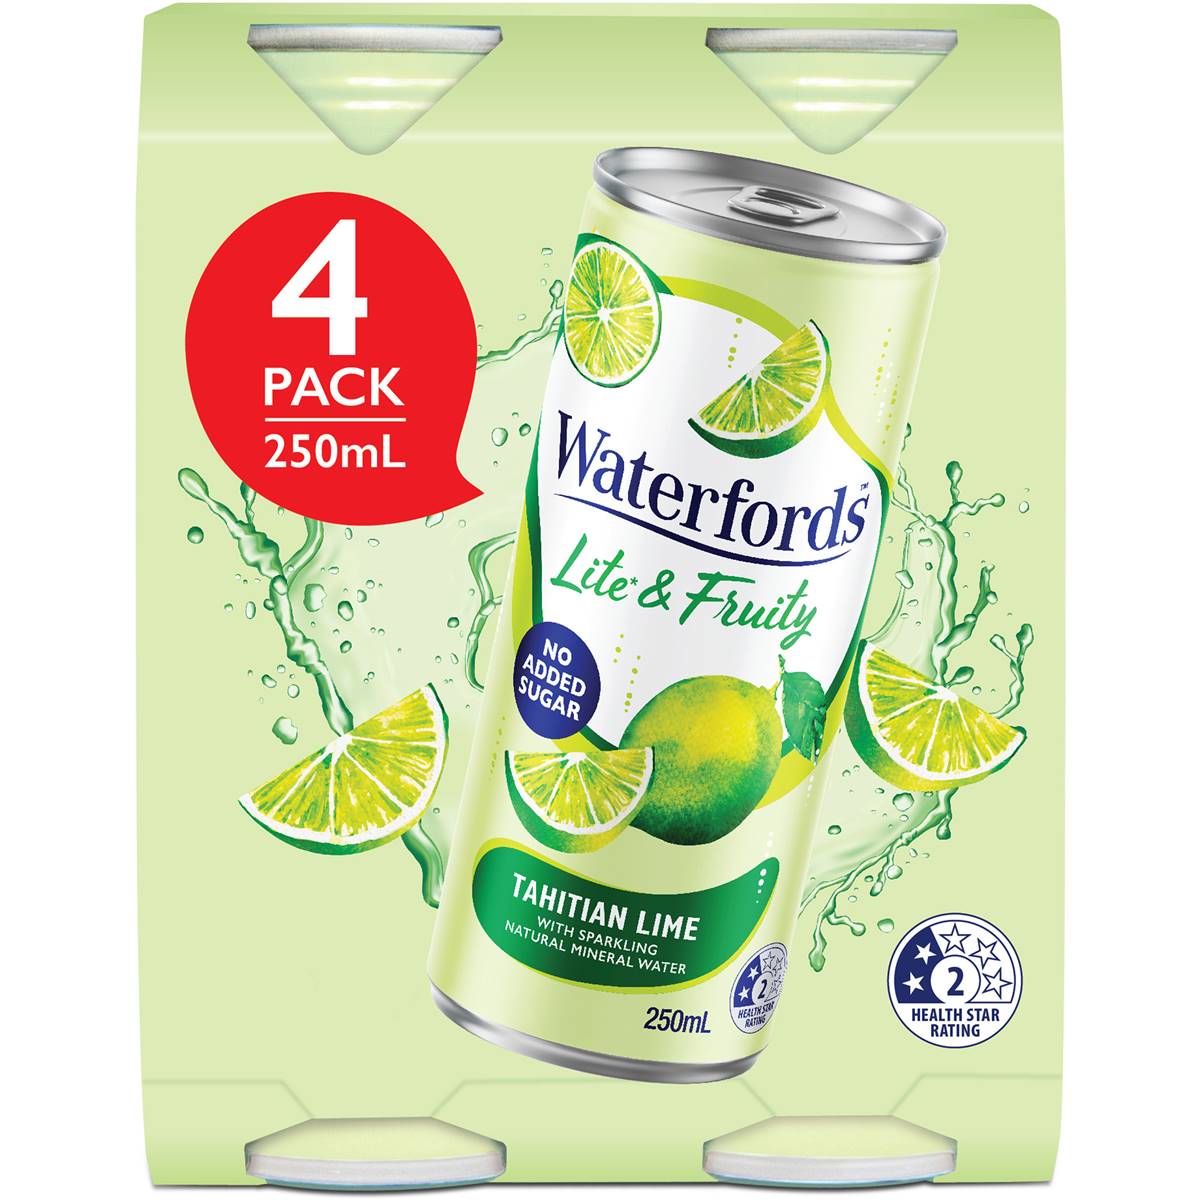 Calories in Waterfords Lite & Fruity Tahitian Lime